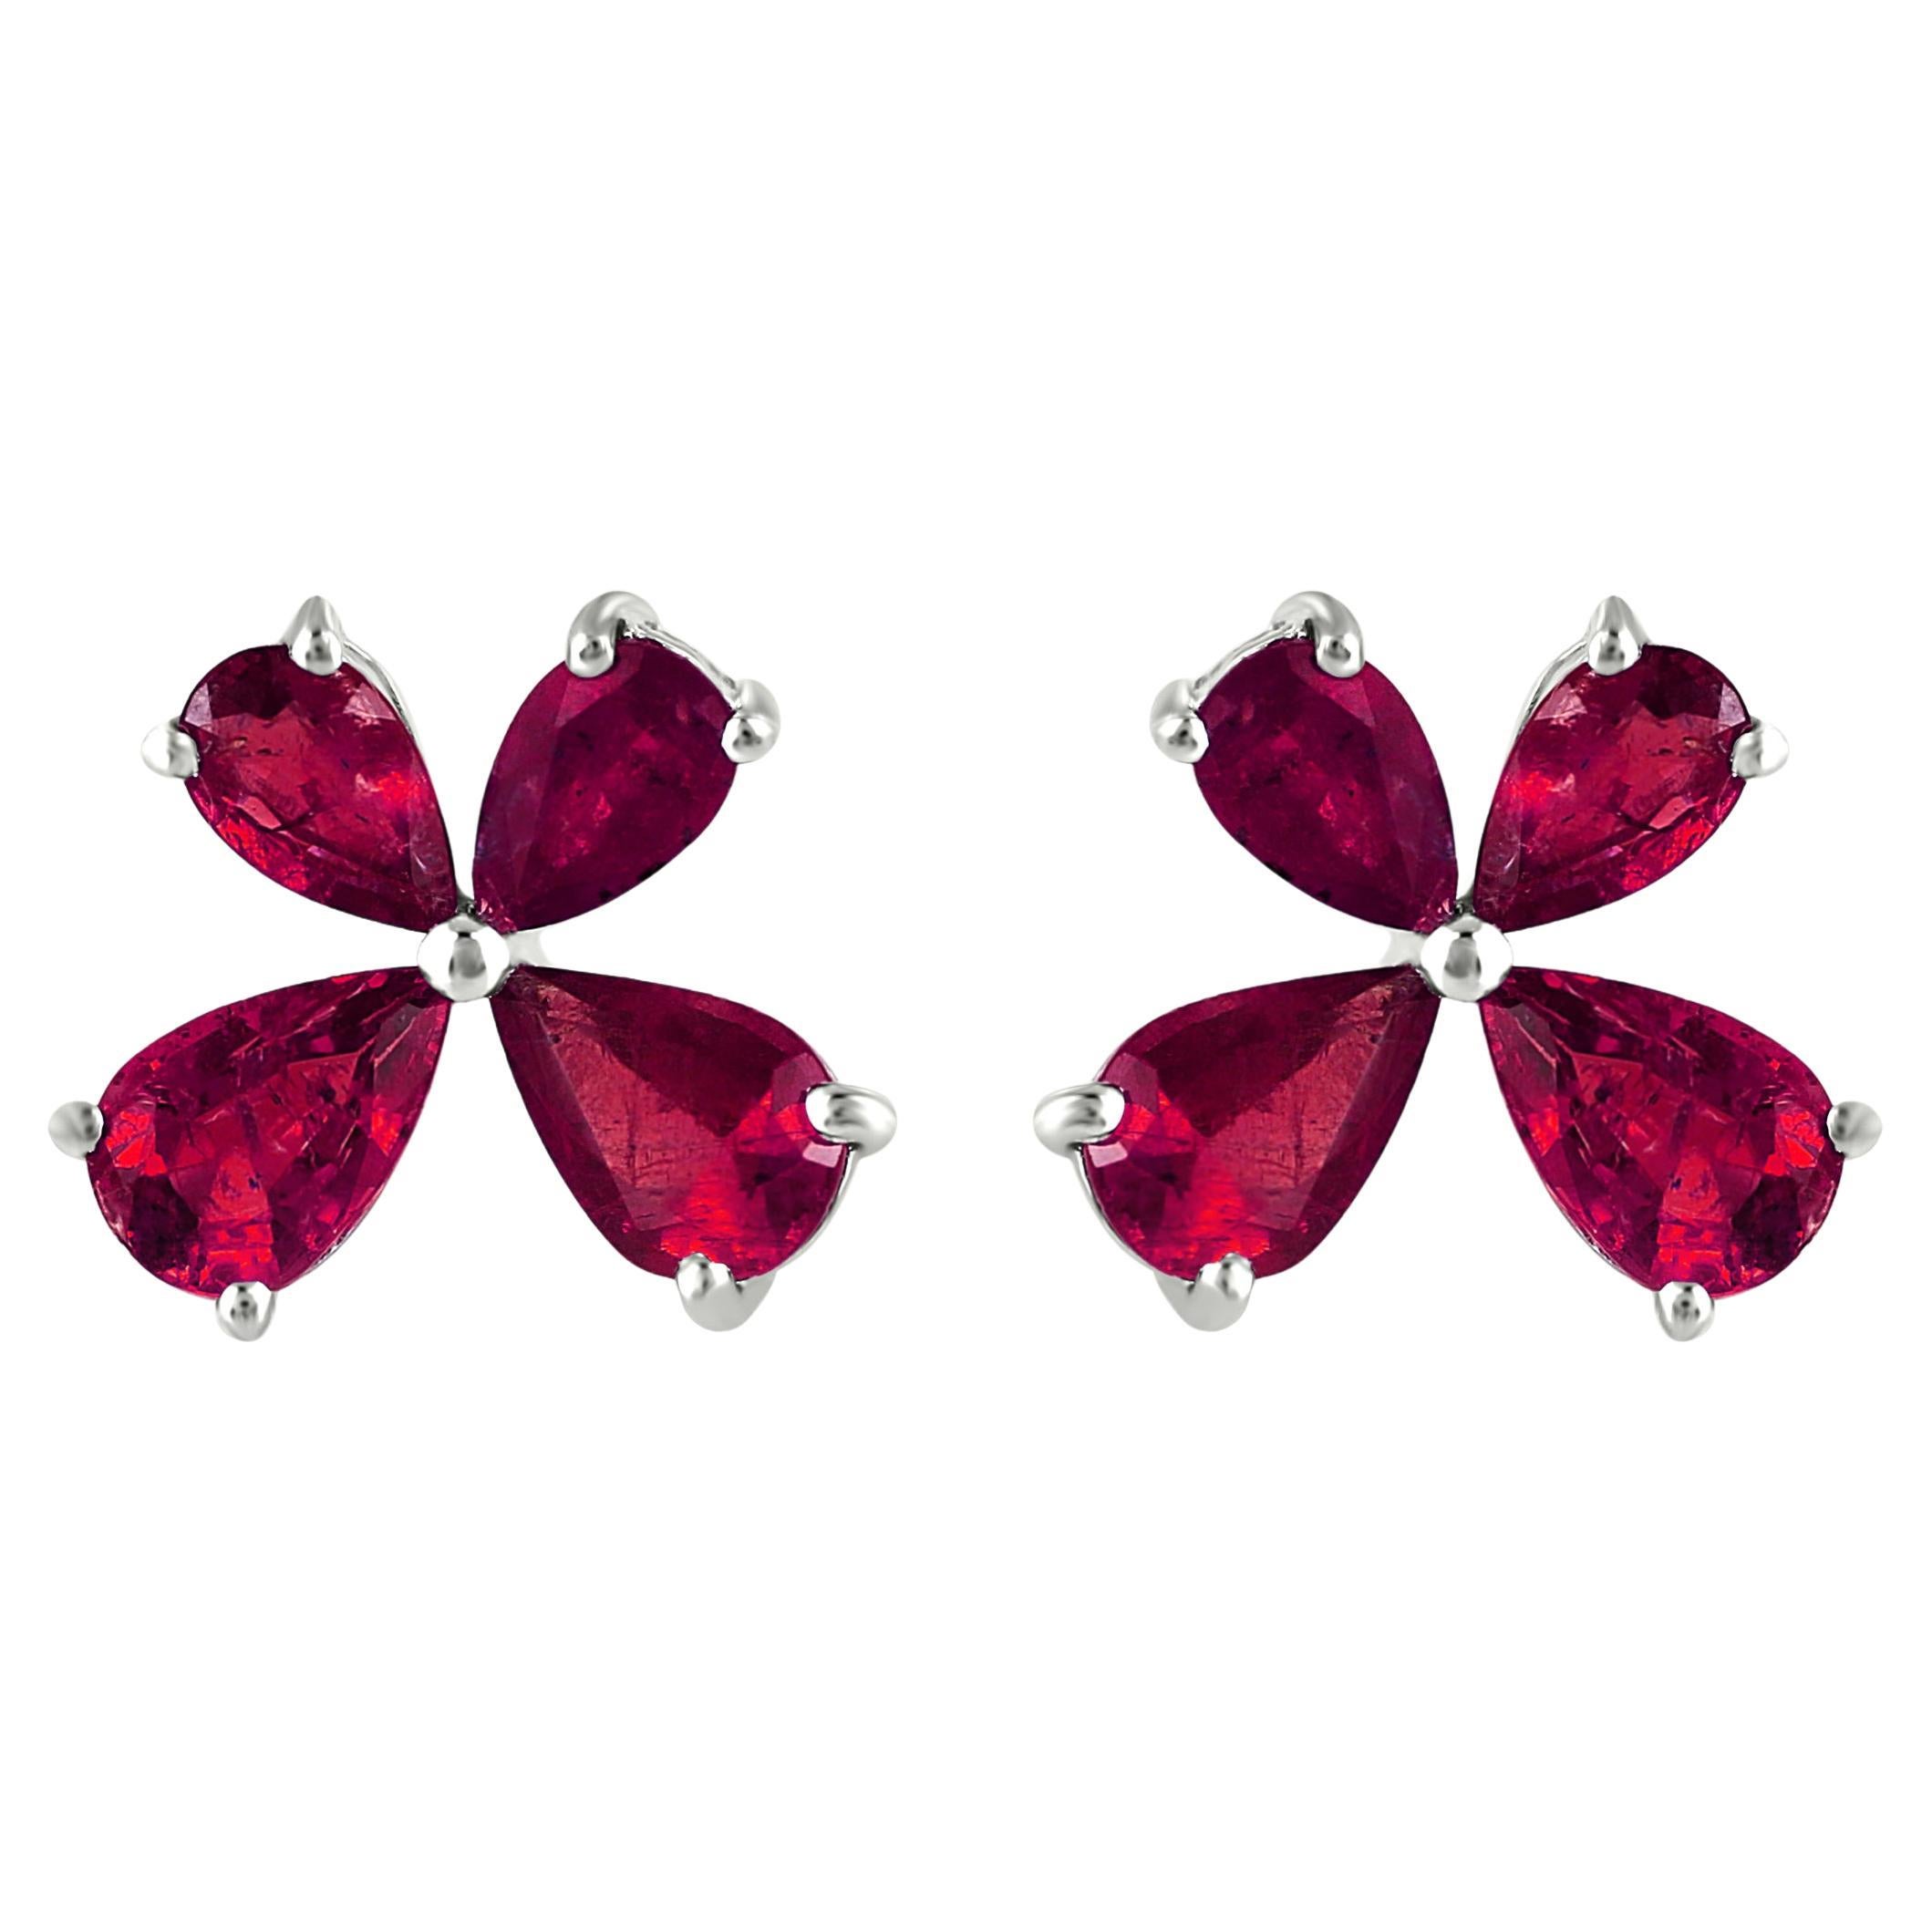 Gemistry 2.45 Cttw. Pear Shaped Ruby Floral Stud Earrings in 18k White Gold For Sale